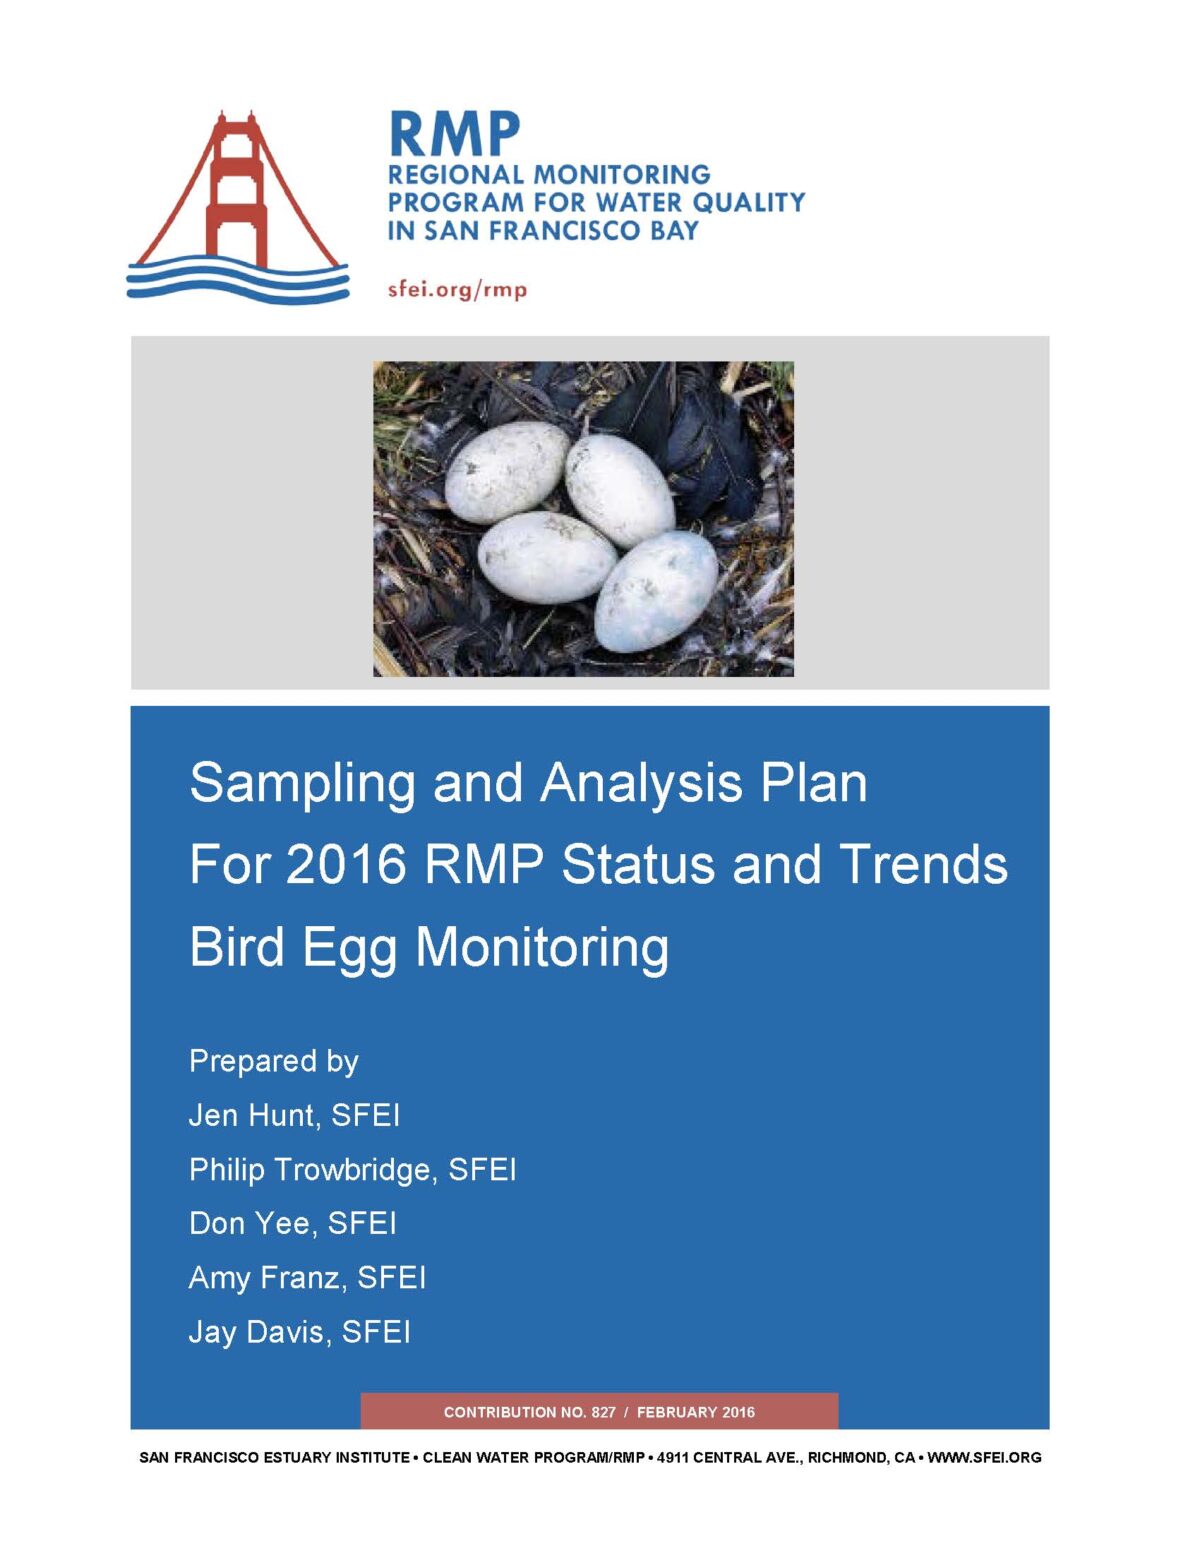 Sampling and Analysis Plan for 2016 RMP Status and Trends Bird Egg Monitoring